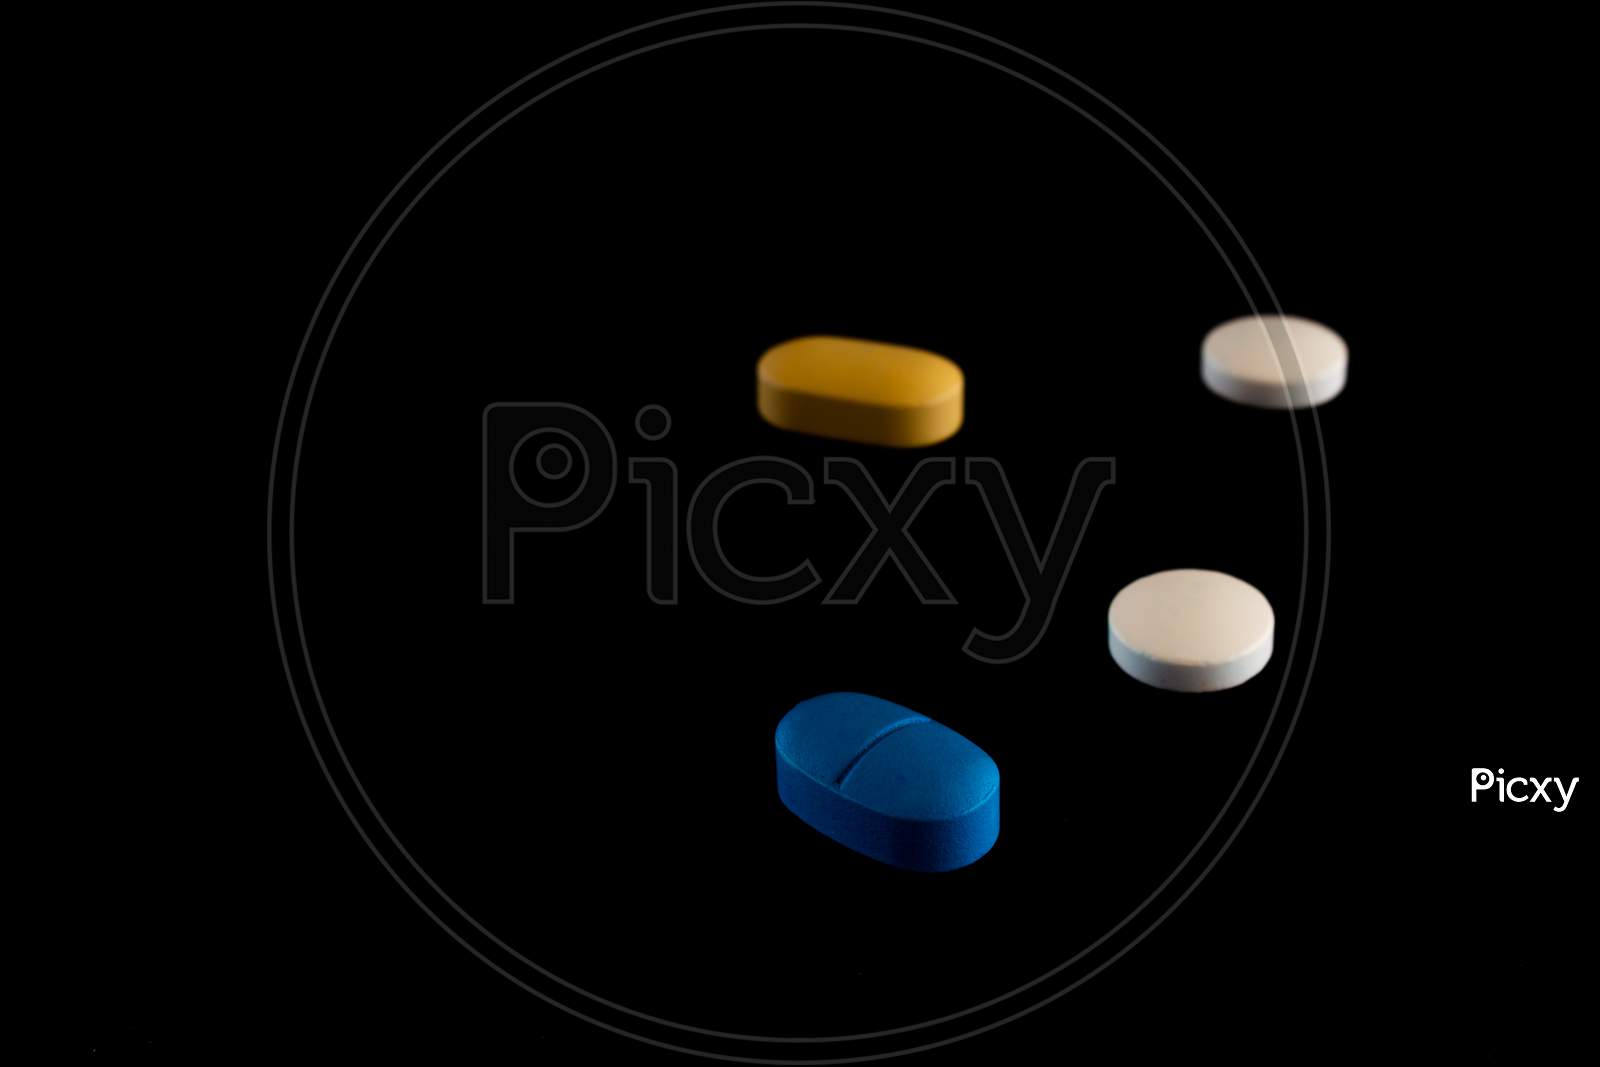 Pills Of Colors On A Neutral Black Background. Selective Focus Of Legal Drugs